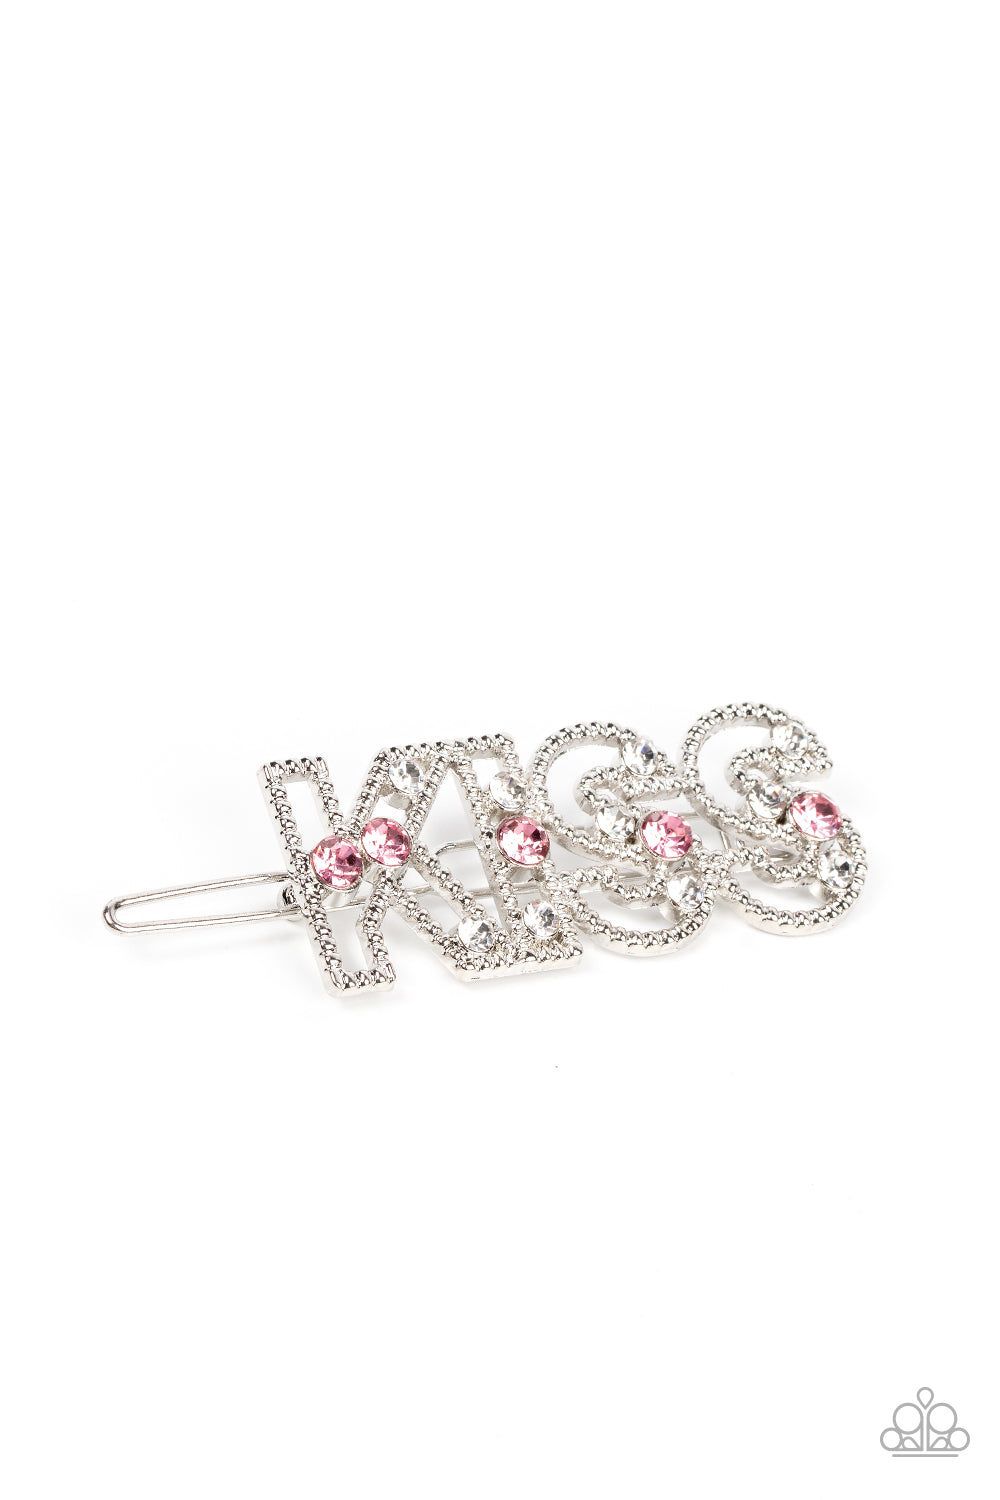 Paparazzi Kiss Bliss - Pink hair clip PRE ORDER - $5 Jewelry with Ashley Swint